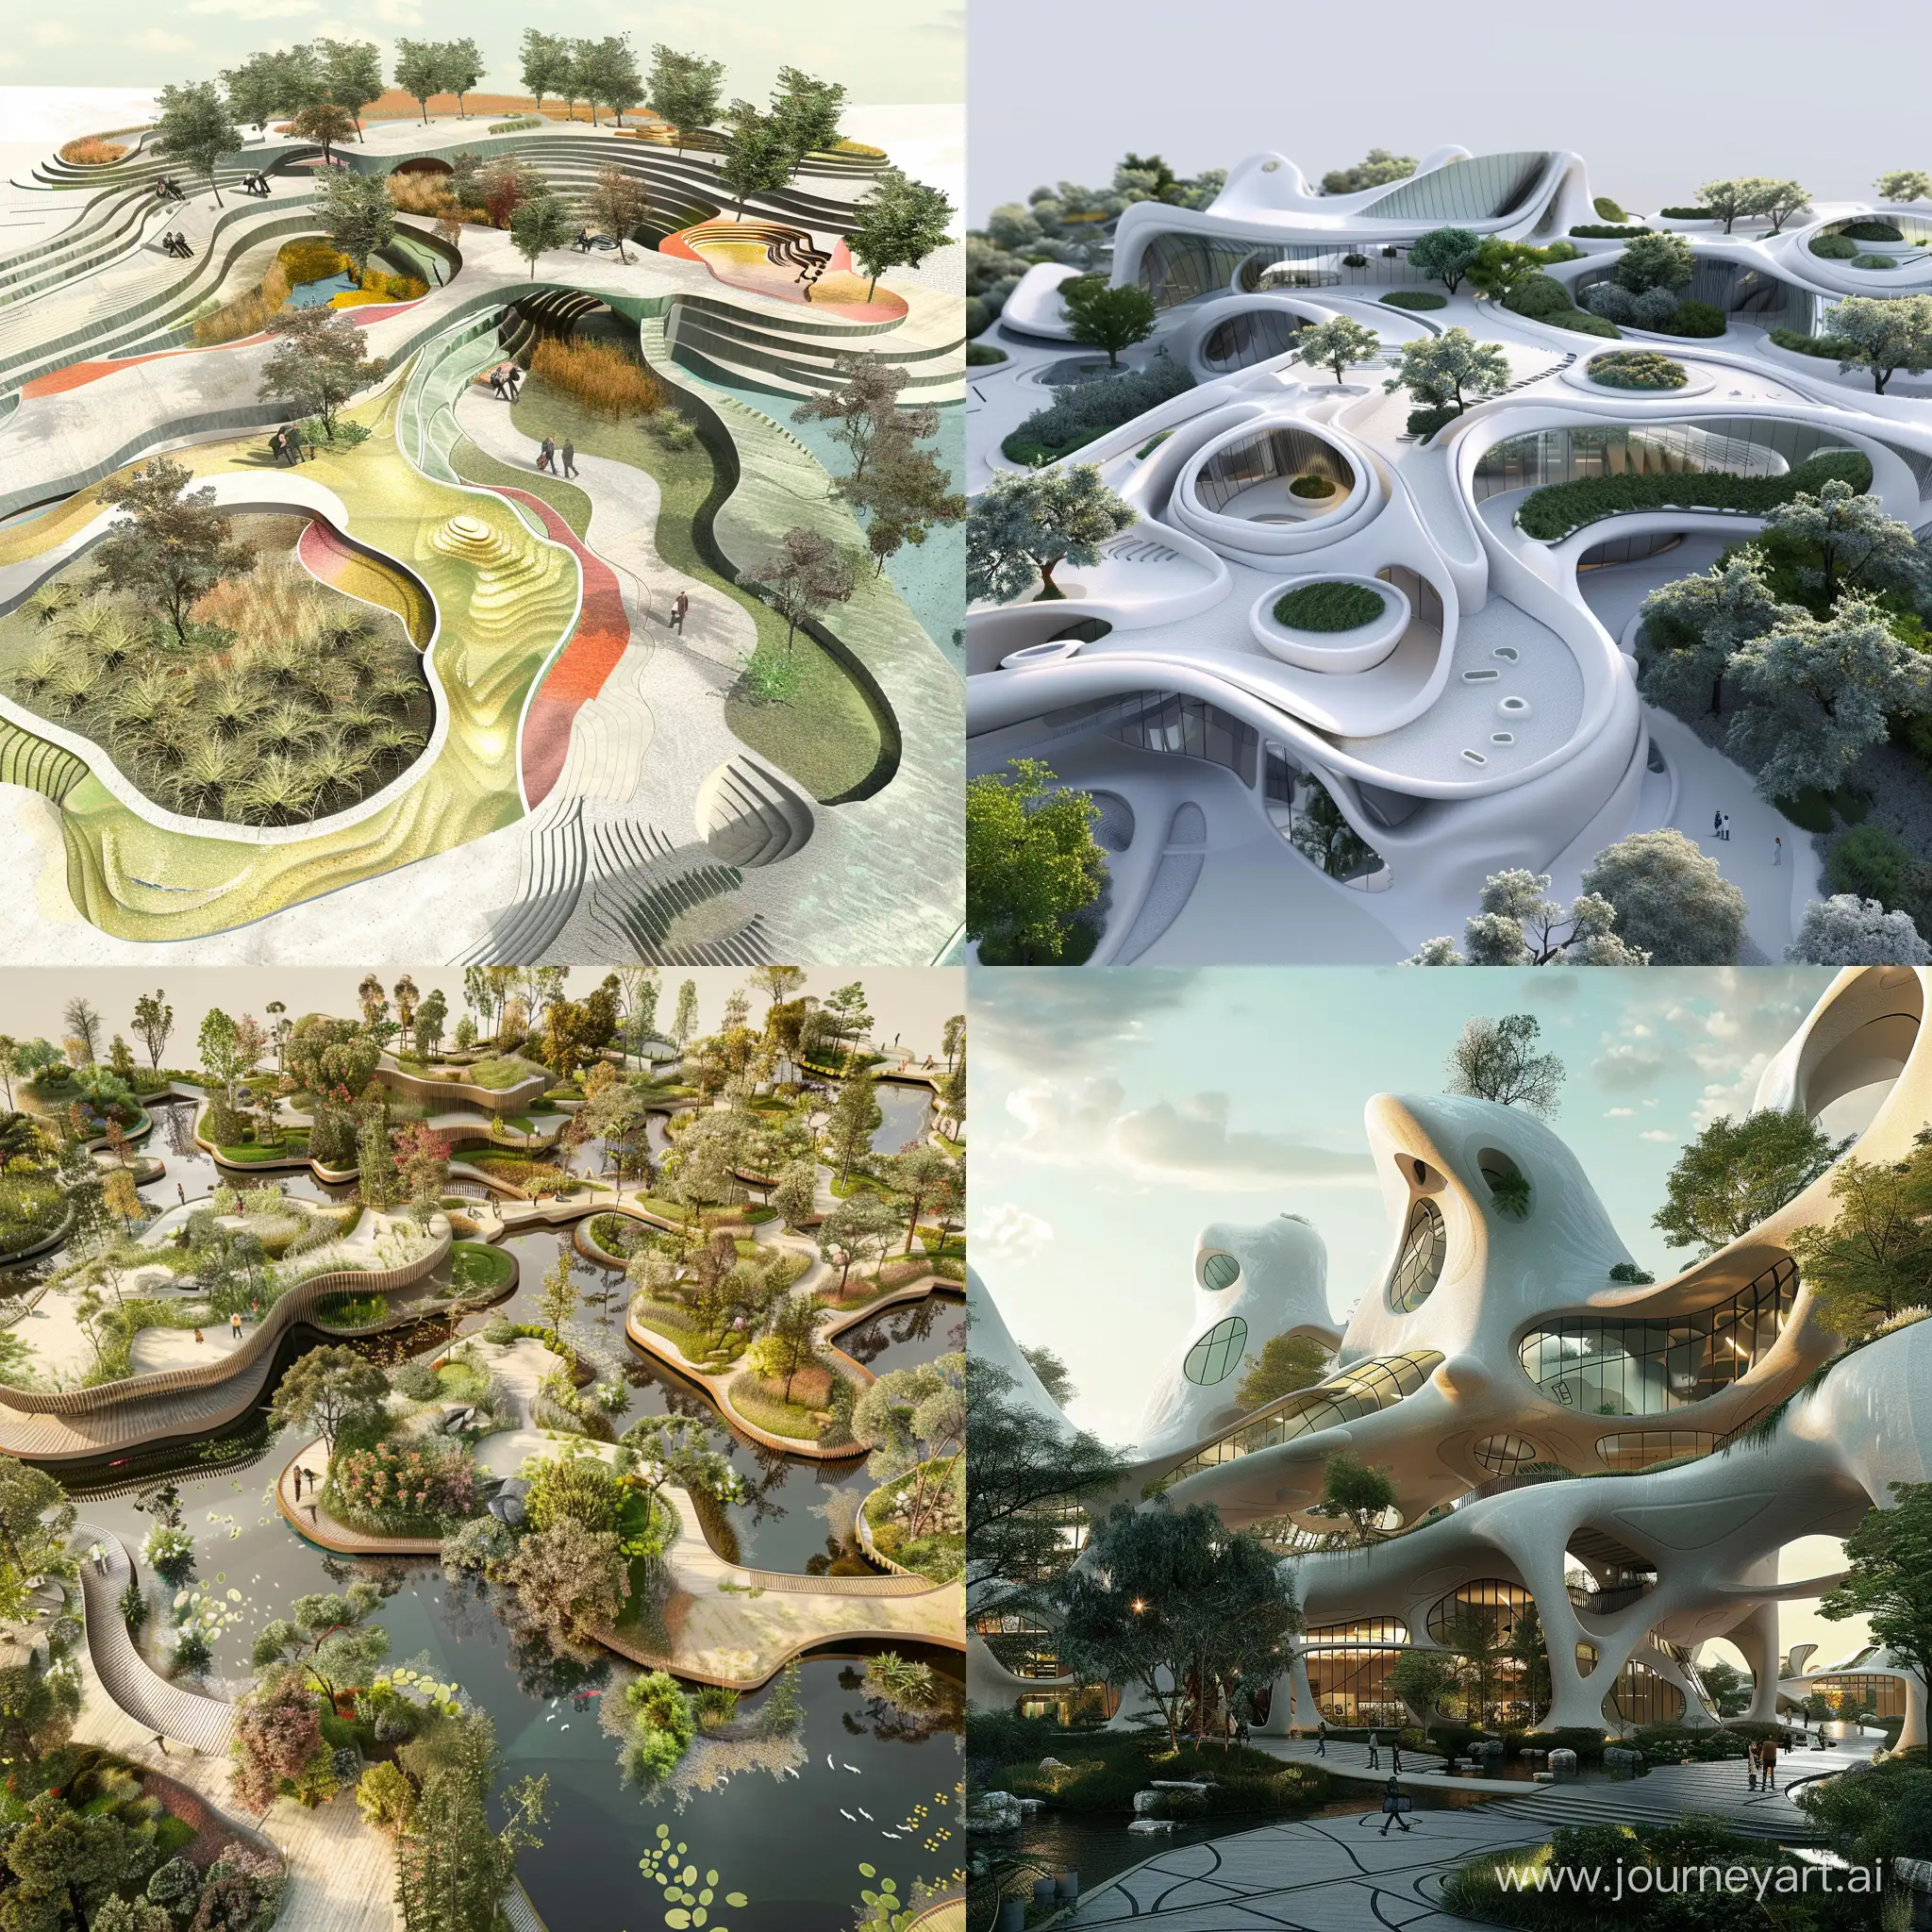 An organic landscape design for an innovation and art city